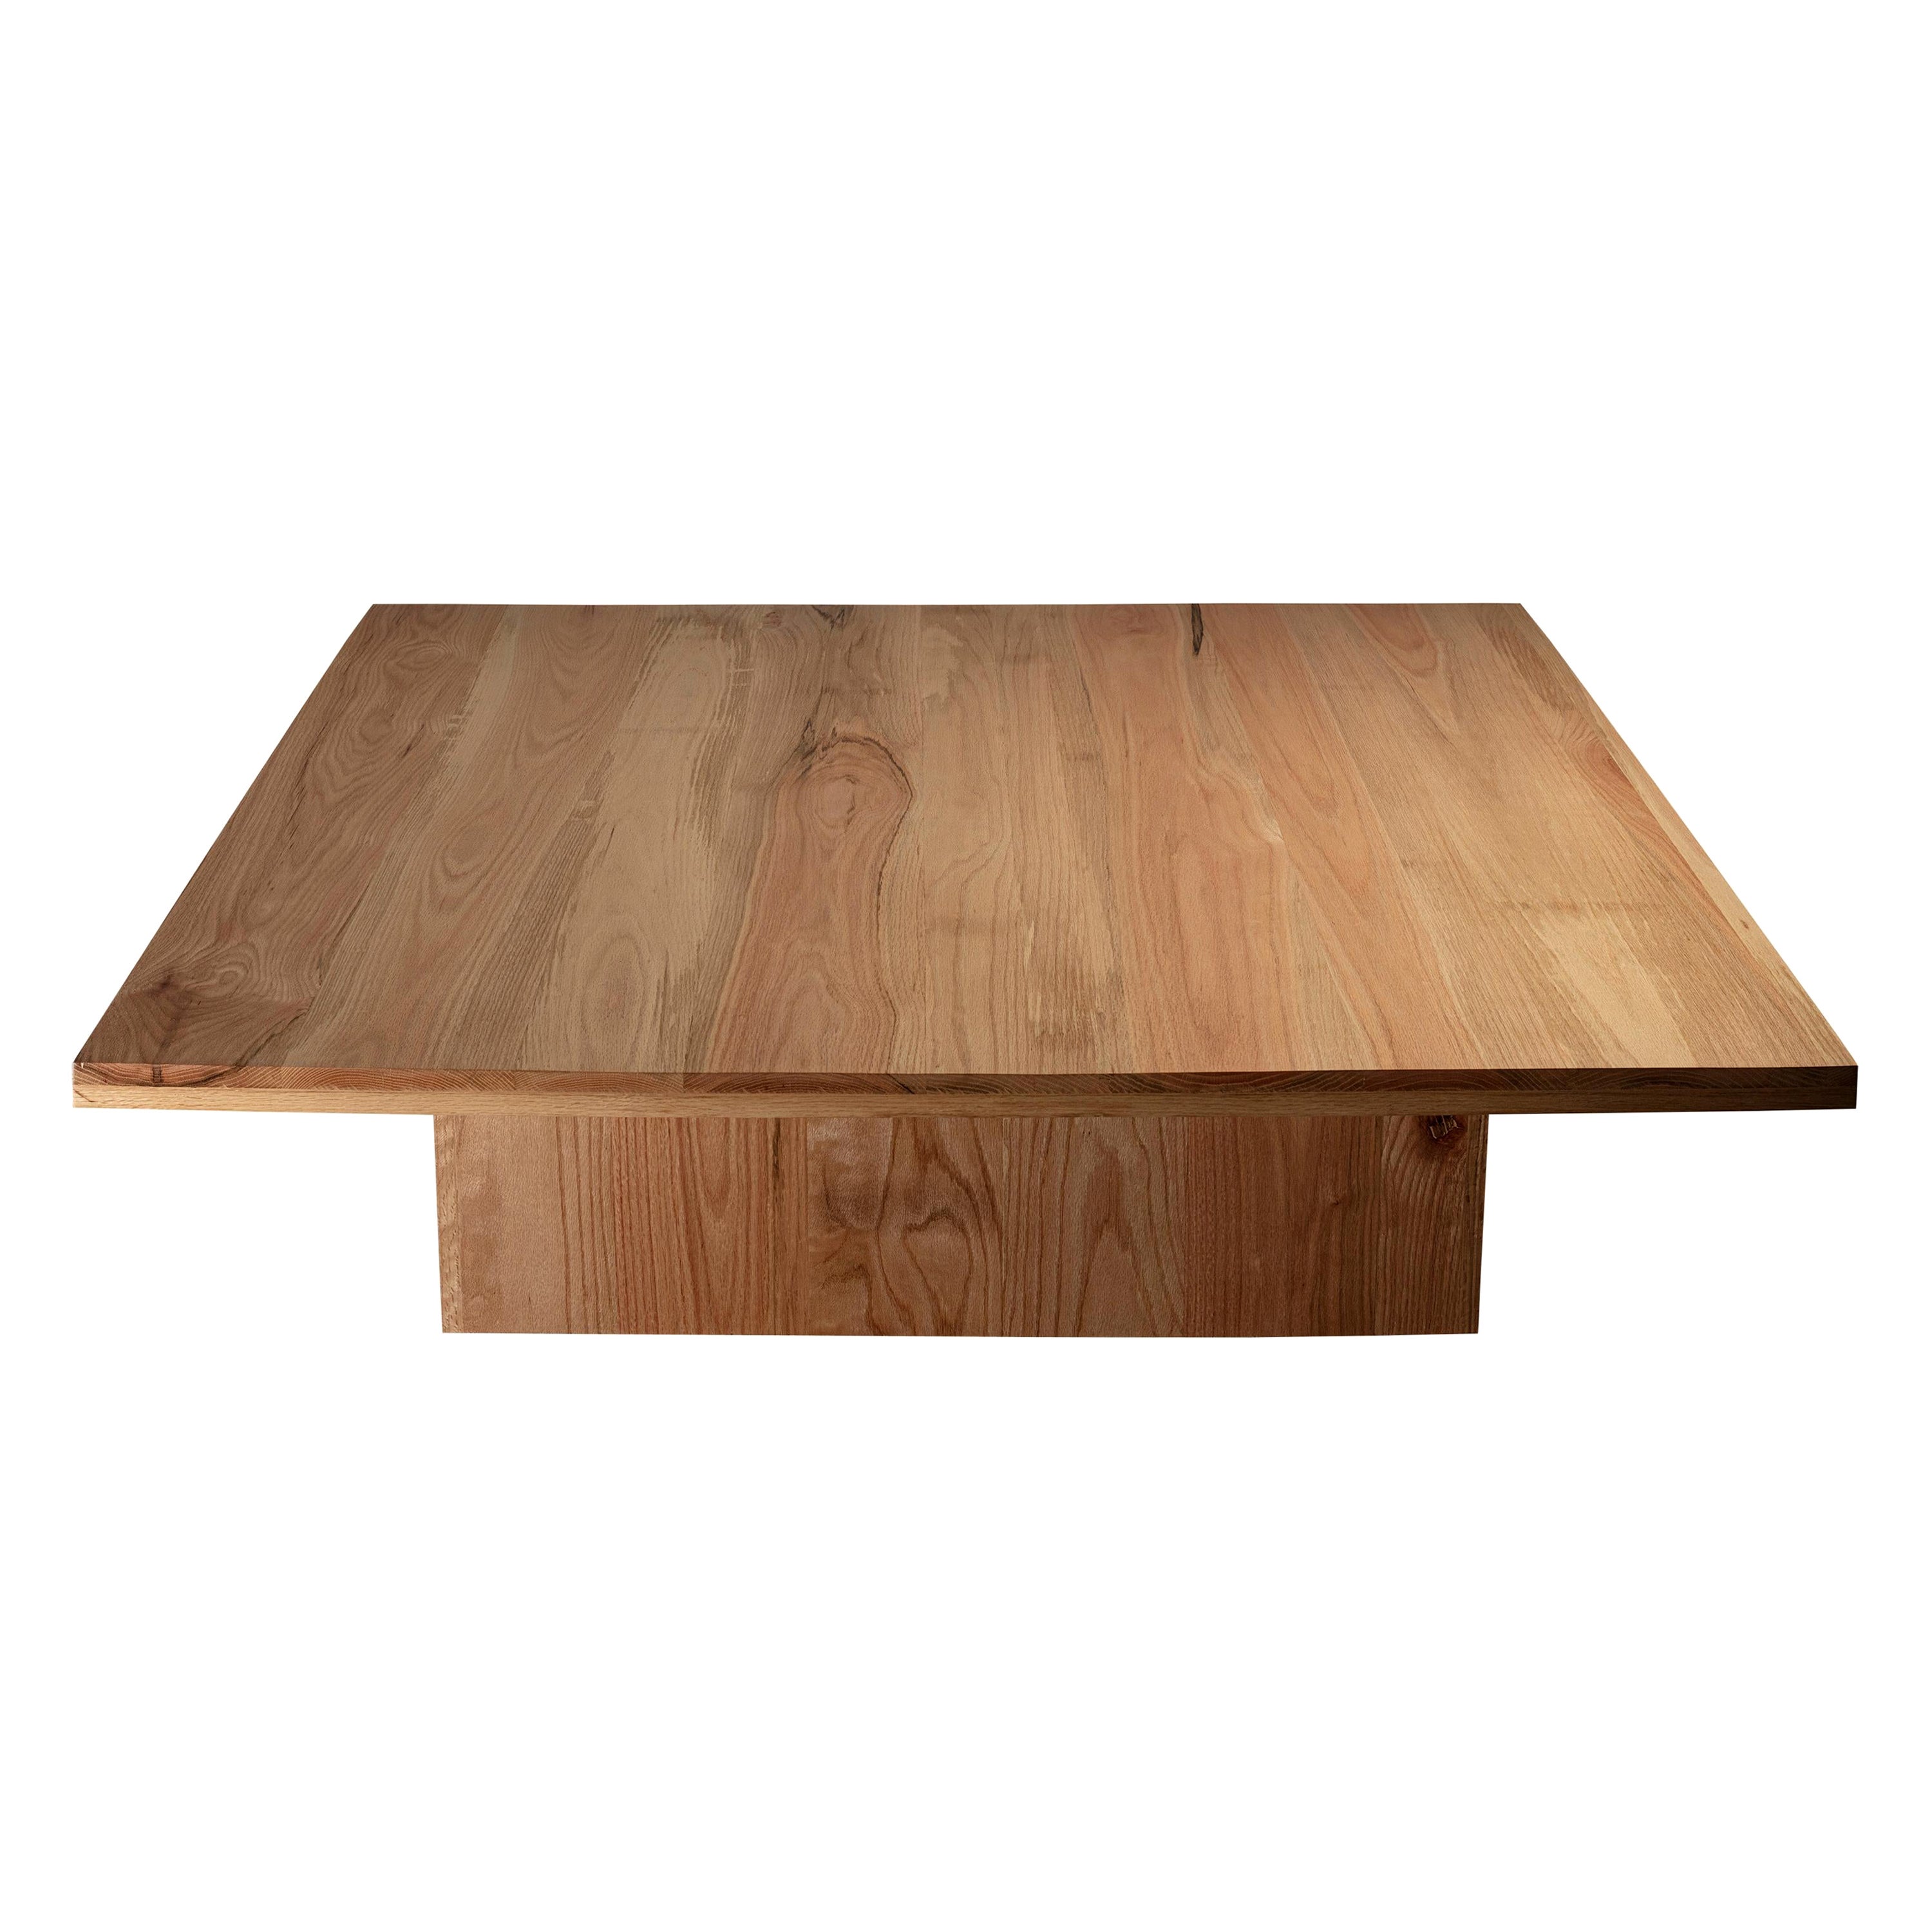 Natural Red Oak Square Coffee Table For Sale